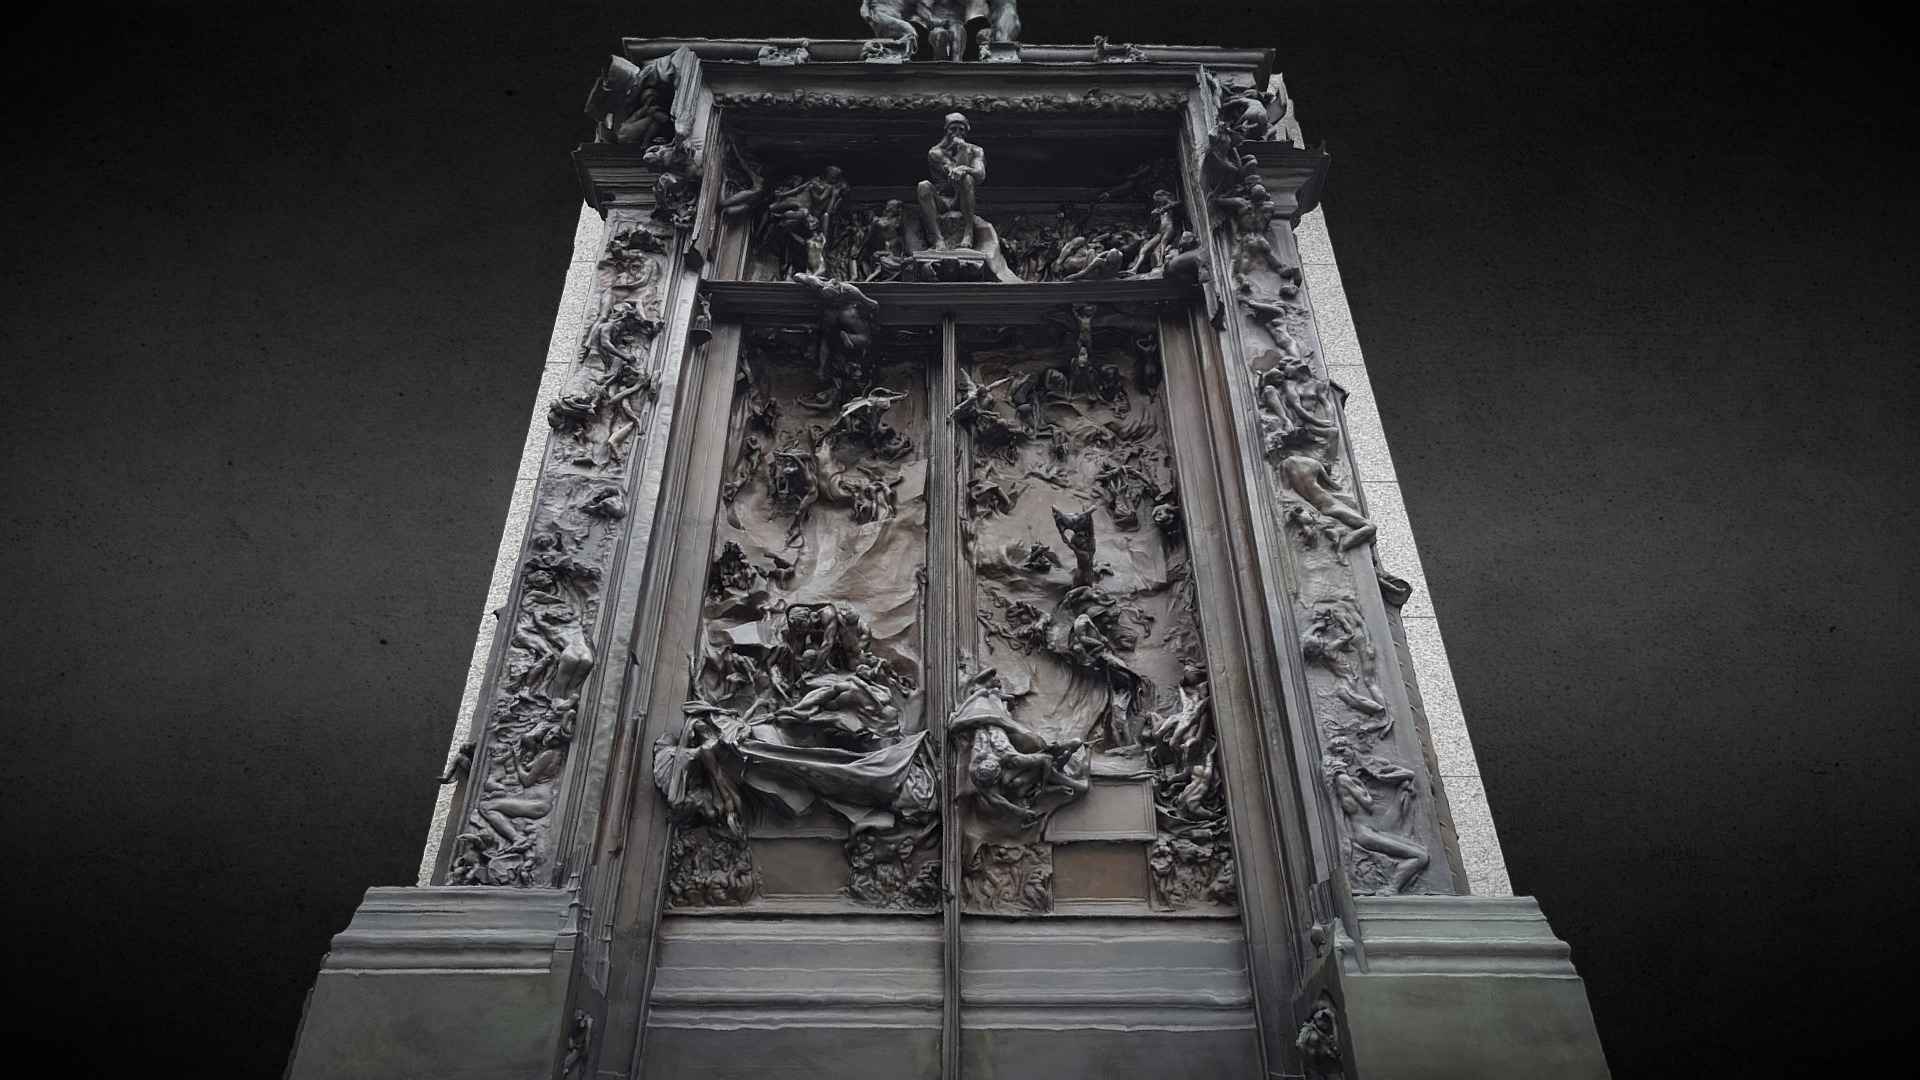 3D model Rodin The Gates of Hell photogrammetry  raw scan - This is a 3D model of the Rodin The Gates of Hell photogrammetry  raw scan. The 3D model is about a wooden box with carvings.